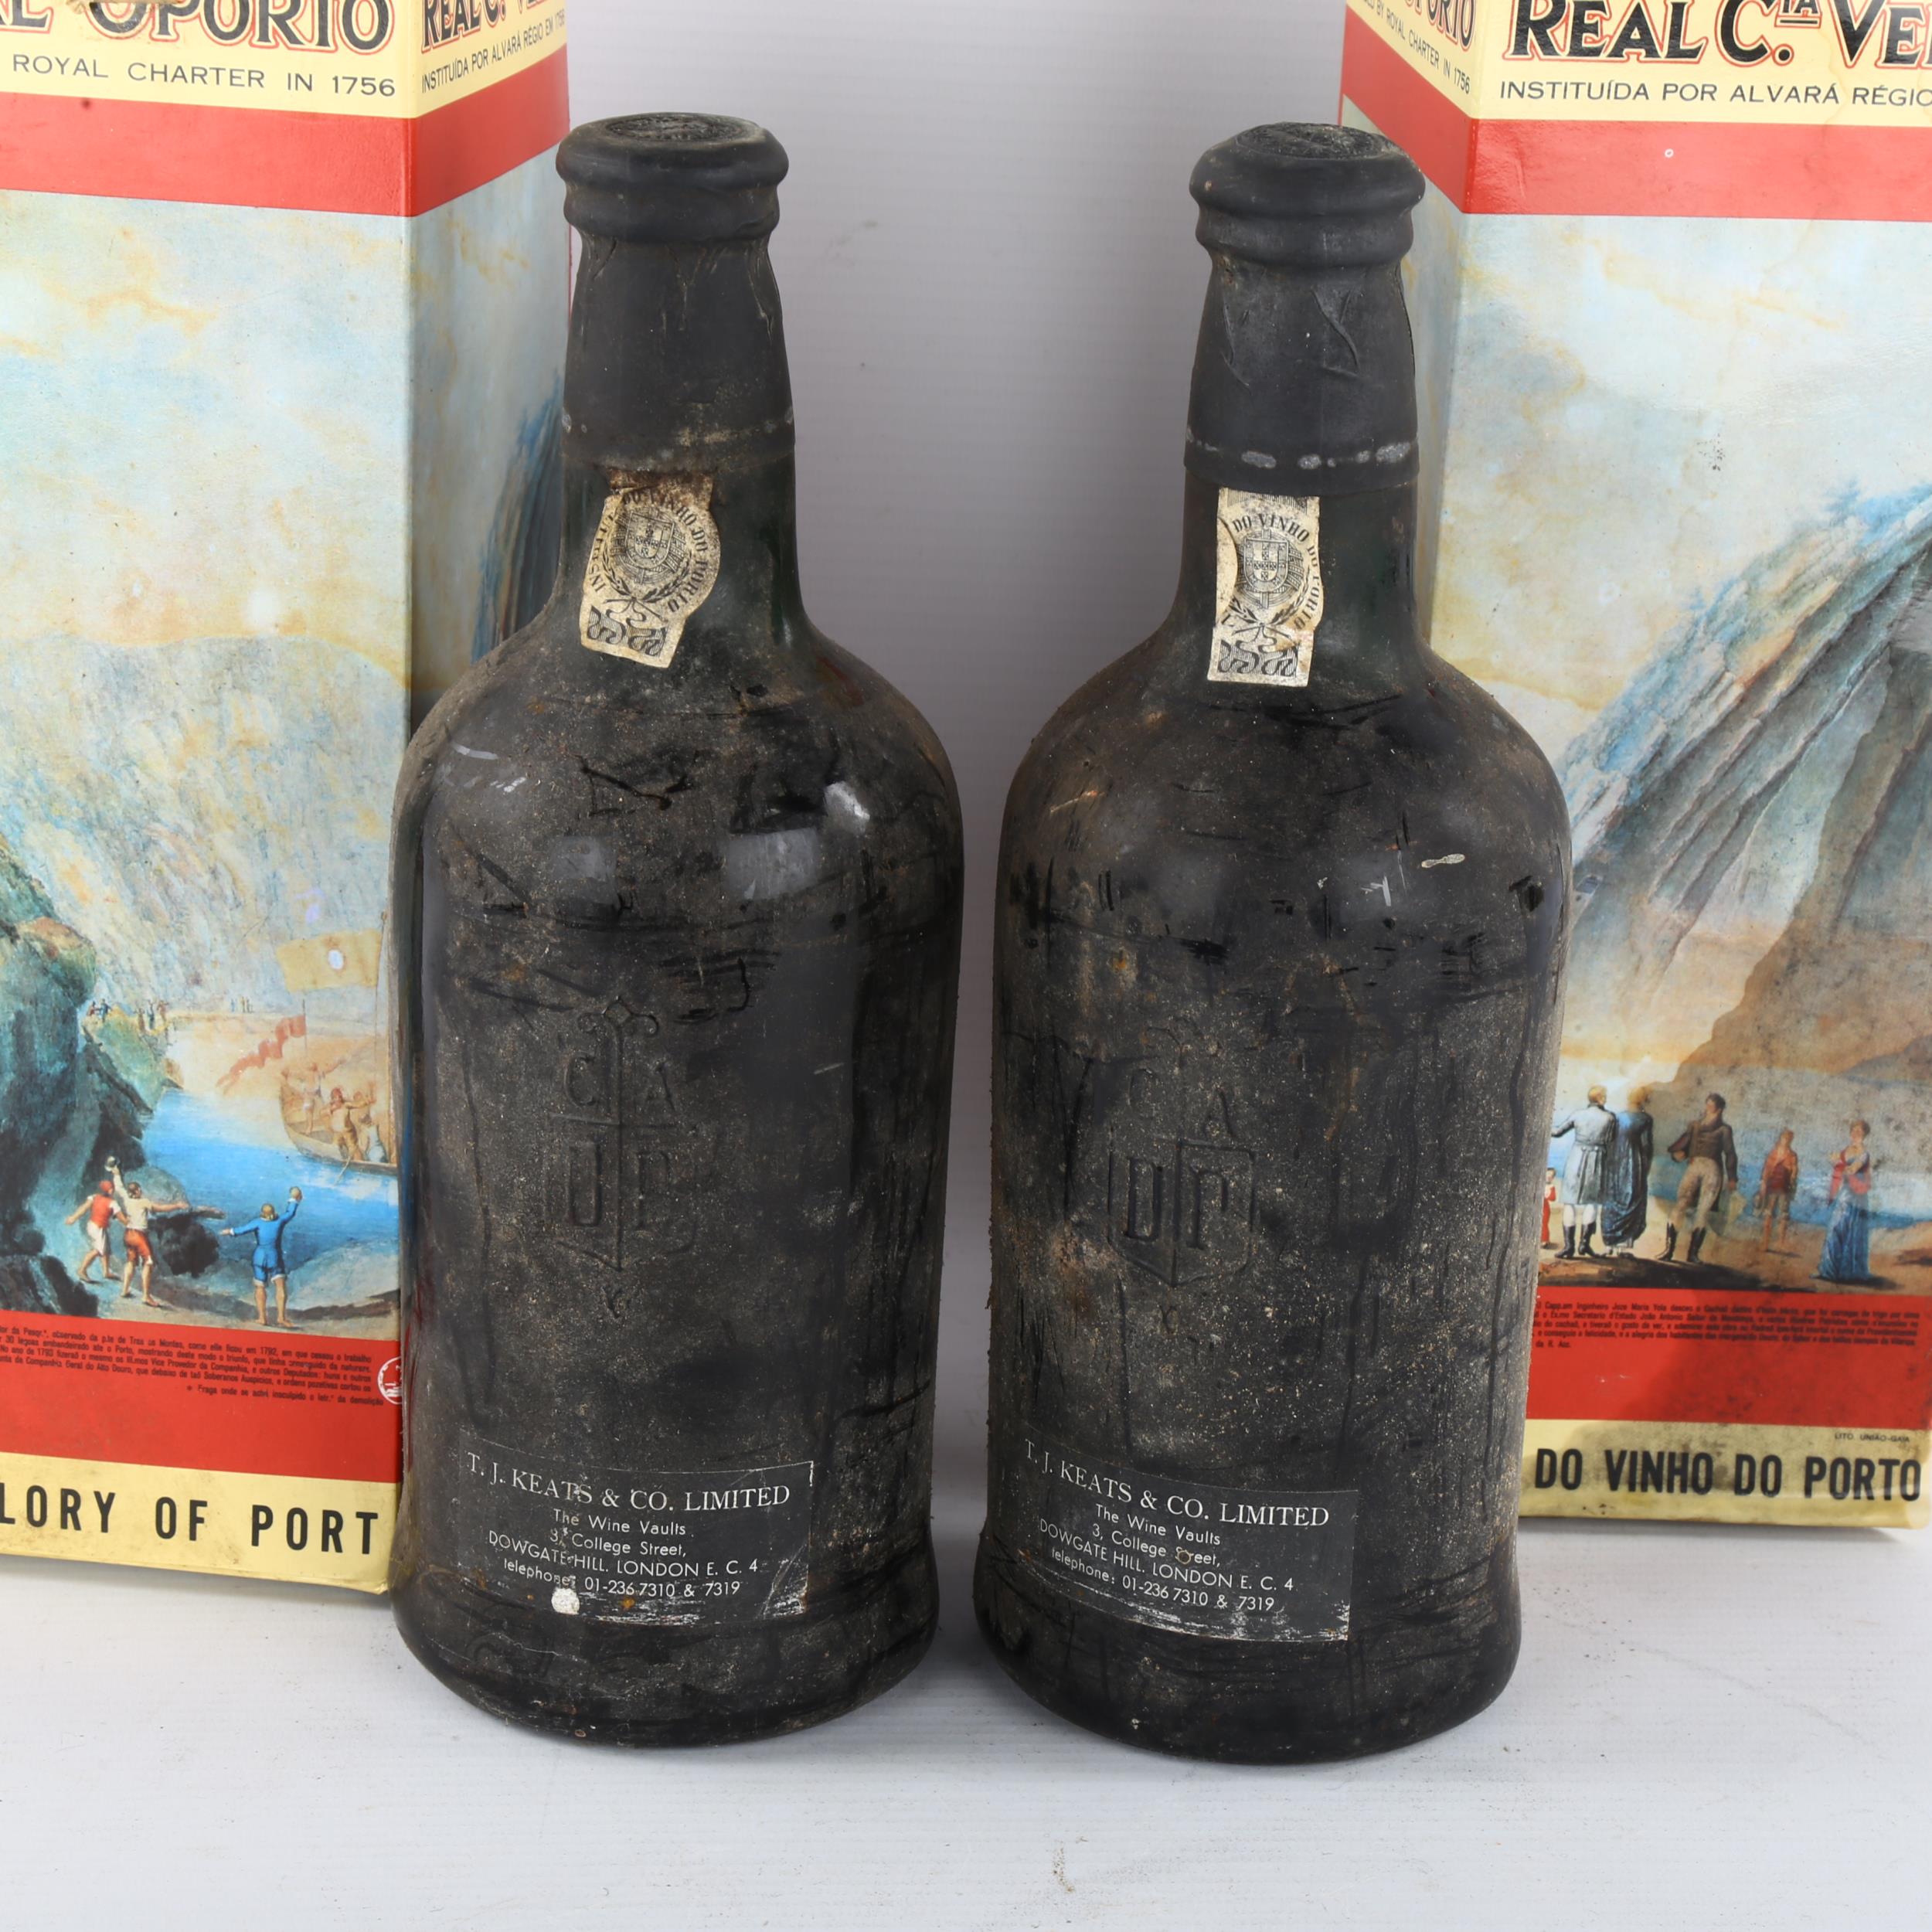 4 bottles of vintage port, 1967 Royal Oporto, 2 in original box Capsules intact, levels high - Image 3 of 3